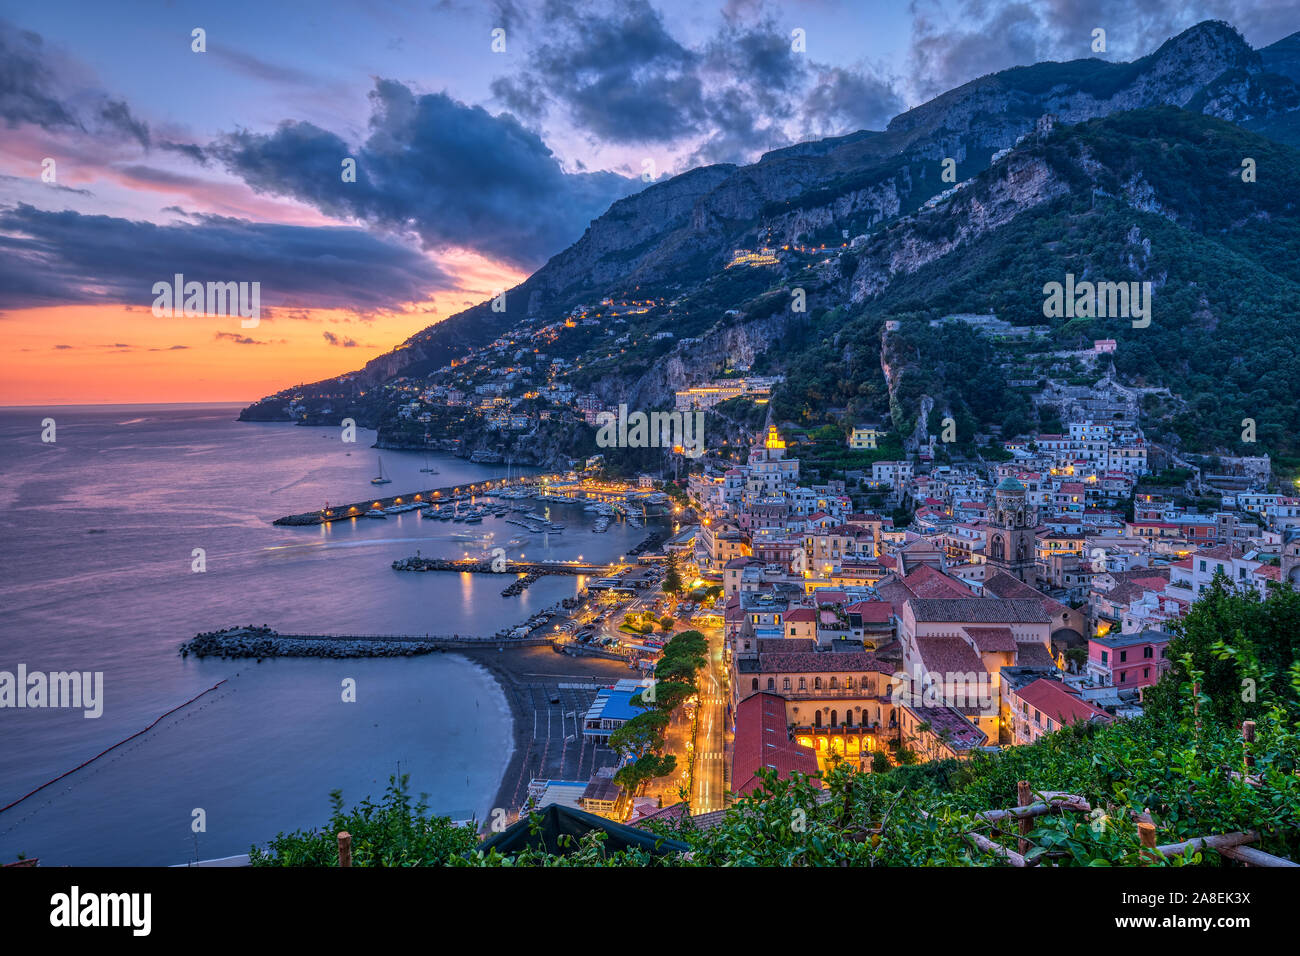 Dusk in Amalfi on the coast of the same name in Italy Stock Photo